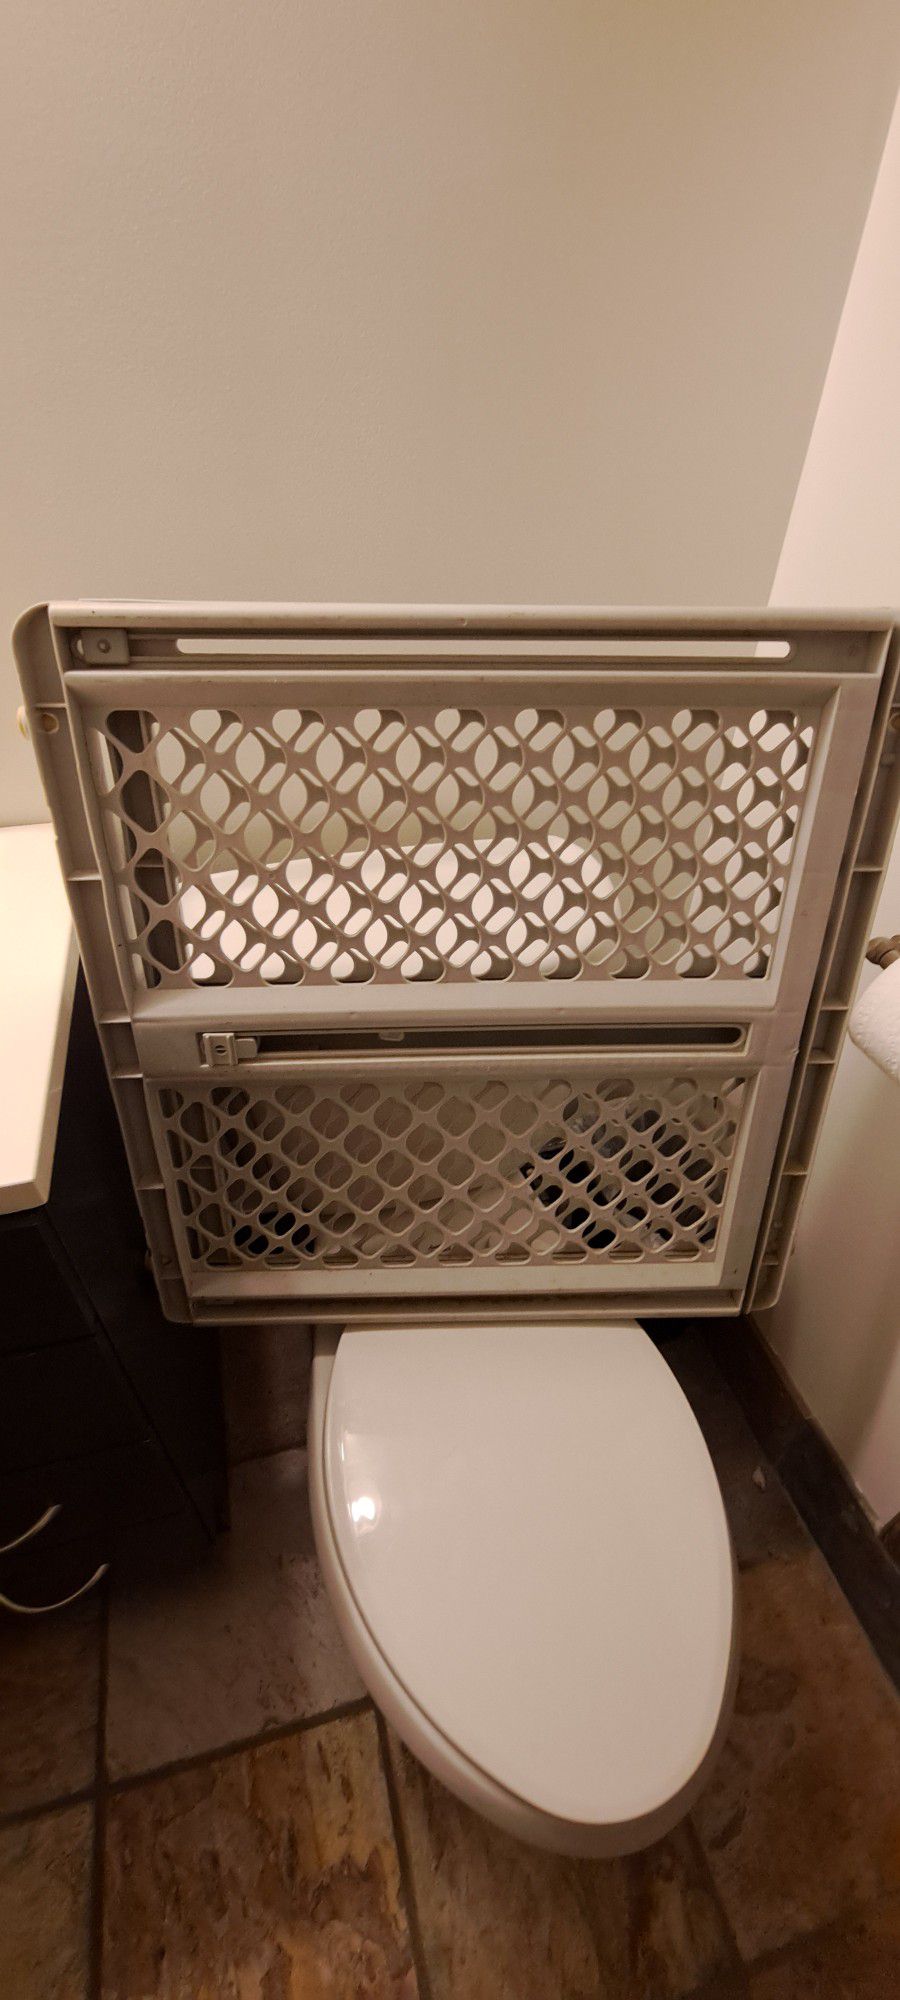 Expandable Baby Gate